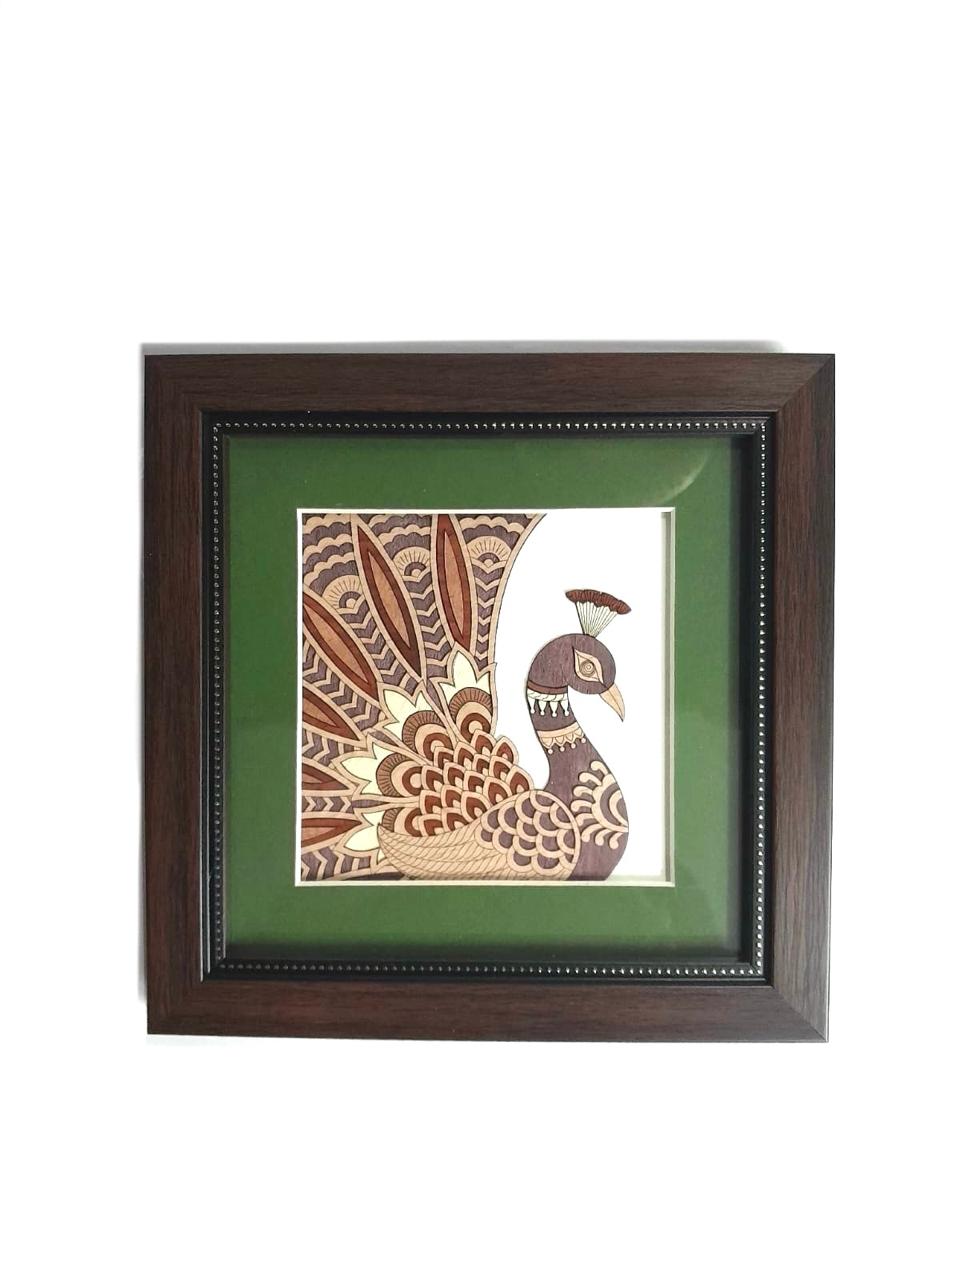 Peacock Bird Handcrafted Wooden 3D Design Art Frame Home Décor By Tamrapatra